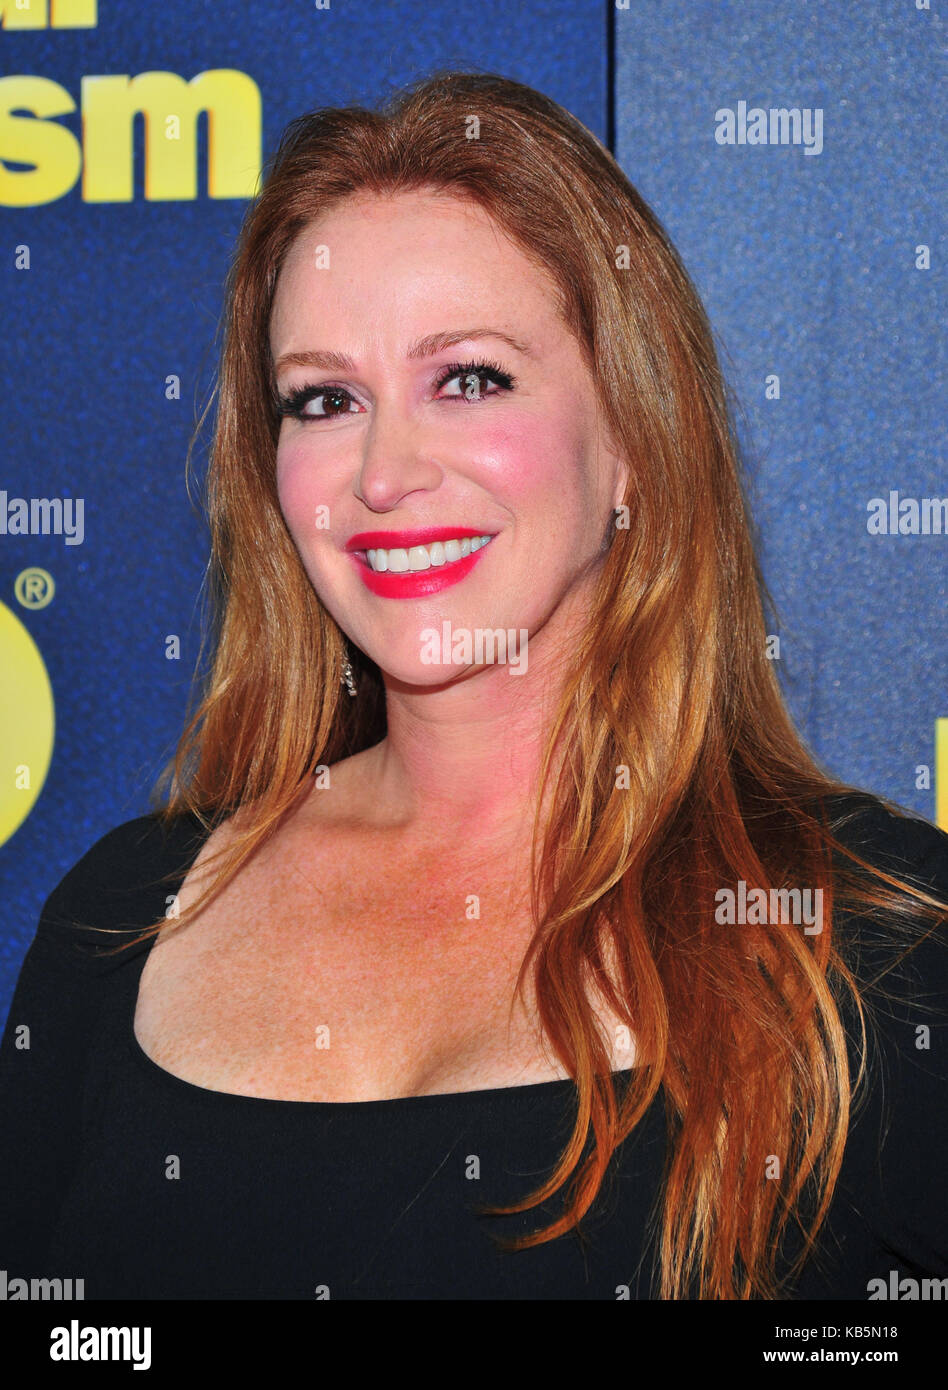 New York, NY, USA. 27th Sep, 2017. Rebecca Creskoff attends 'Curb Your Enthusiasm' season 9 premiere at SVA Theater on September 27, 2017 in New York City. Credit: John Palmer/Media Punch/Alamy Live News Stock Photo